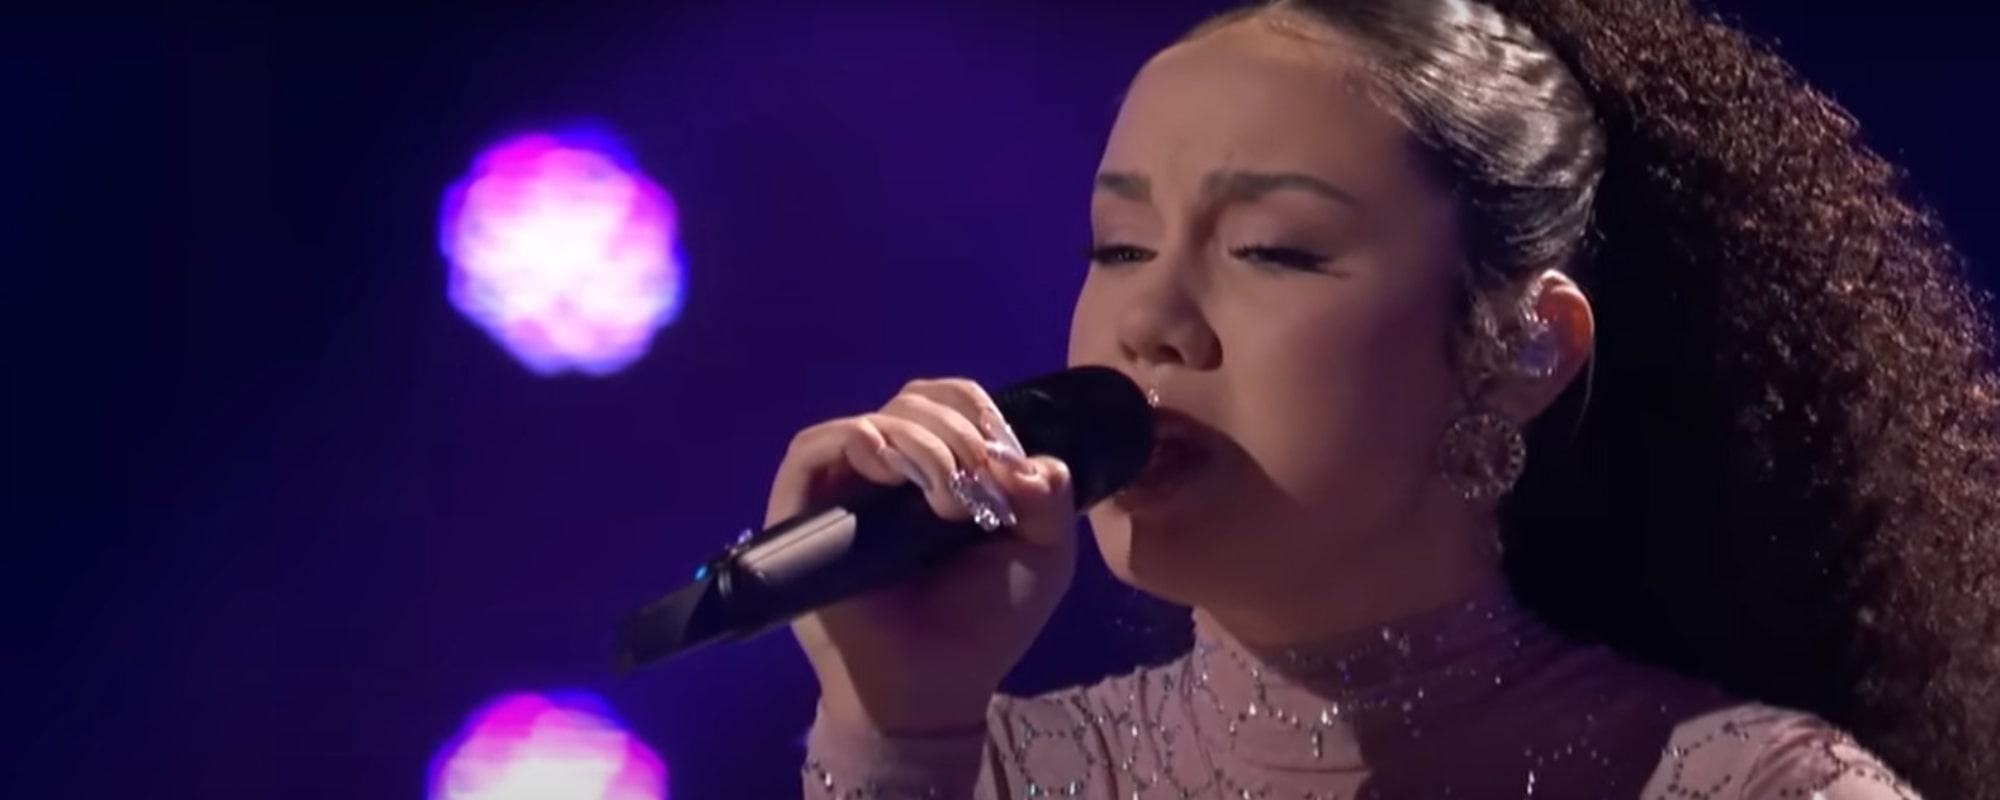 ‘The Voice’: Watch Serenity Arce Wow the Coaches with a Stunning Selena Gomez Cover